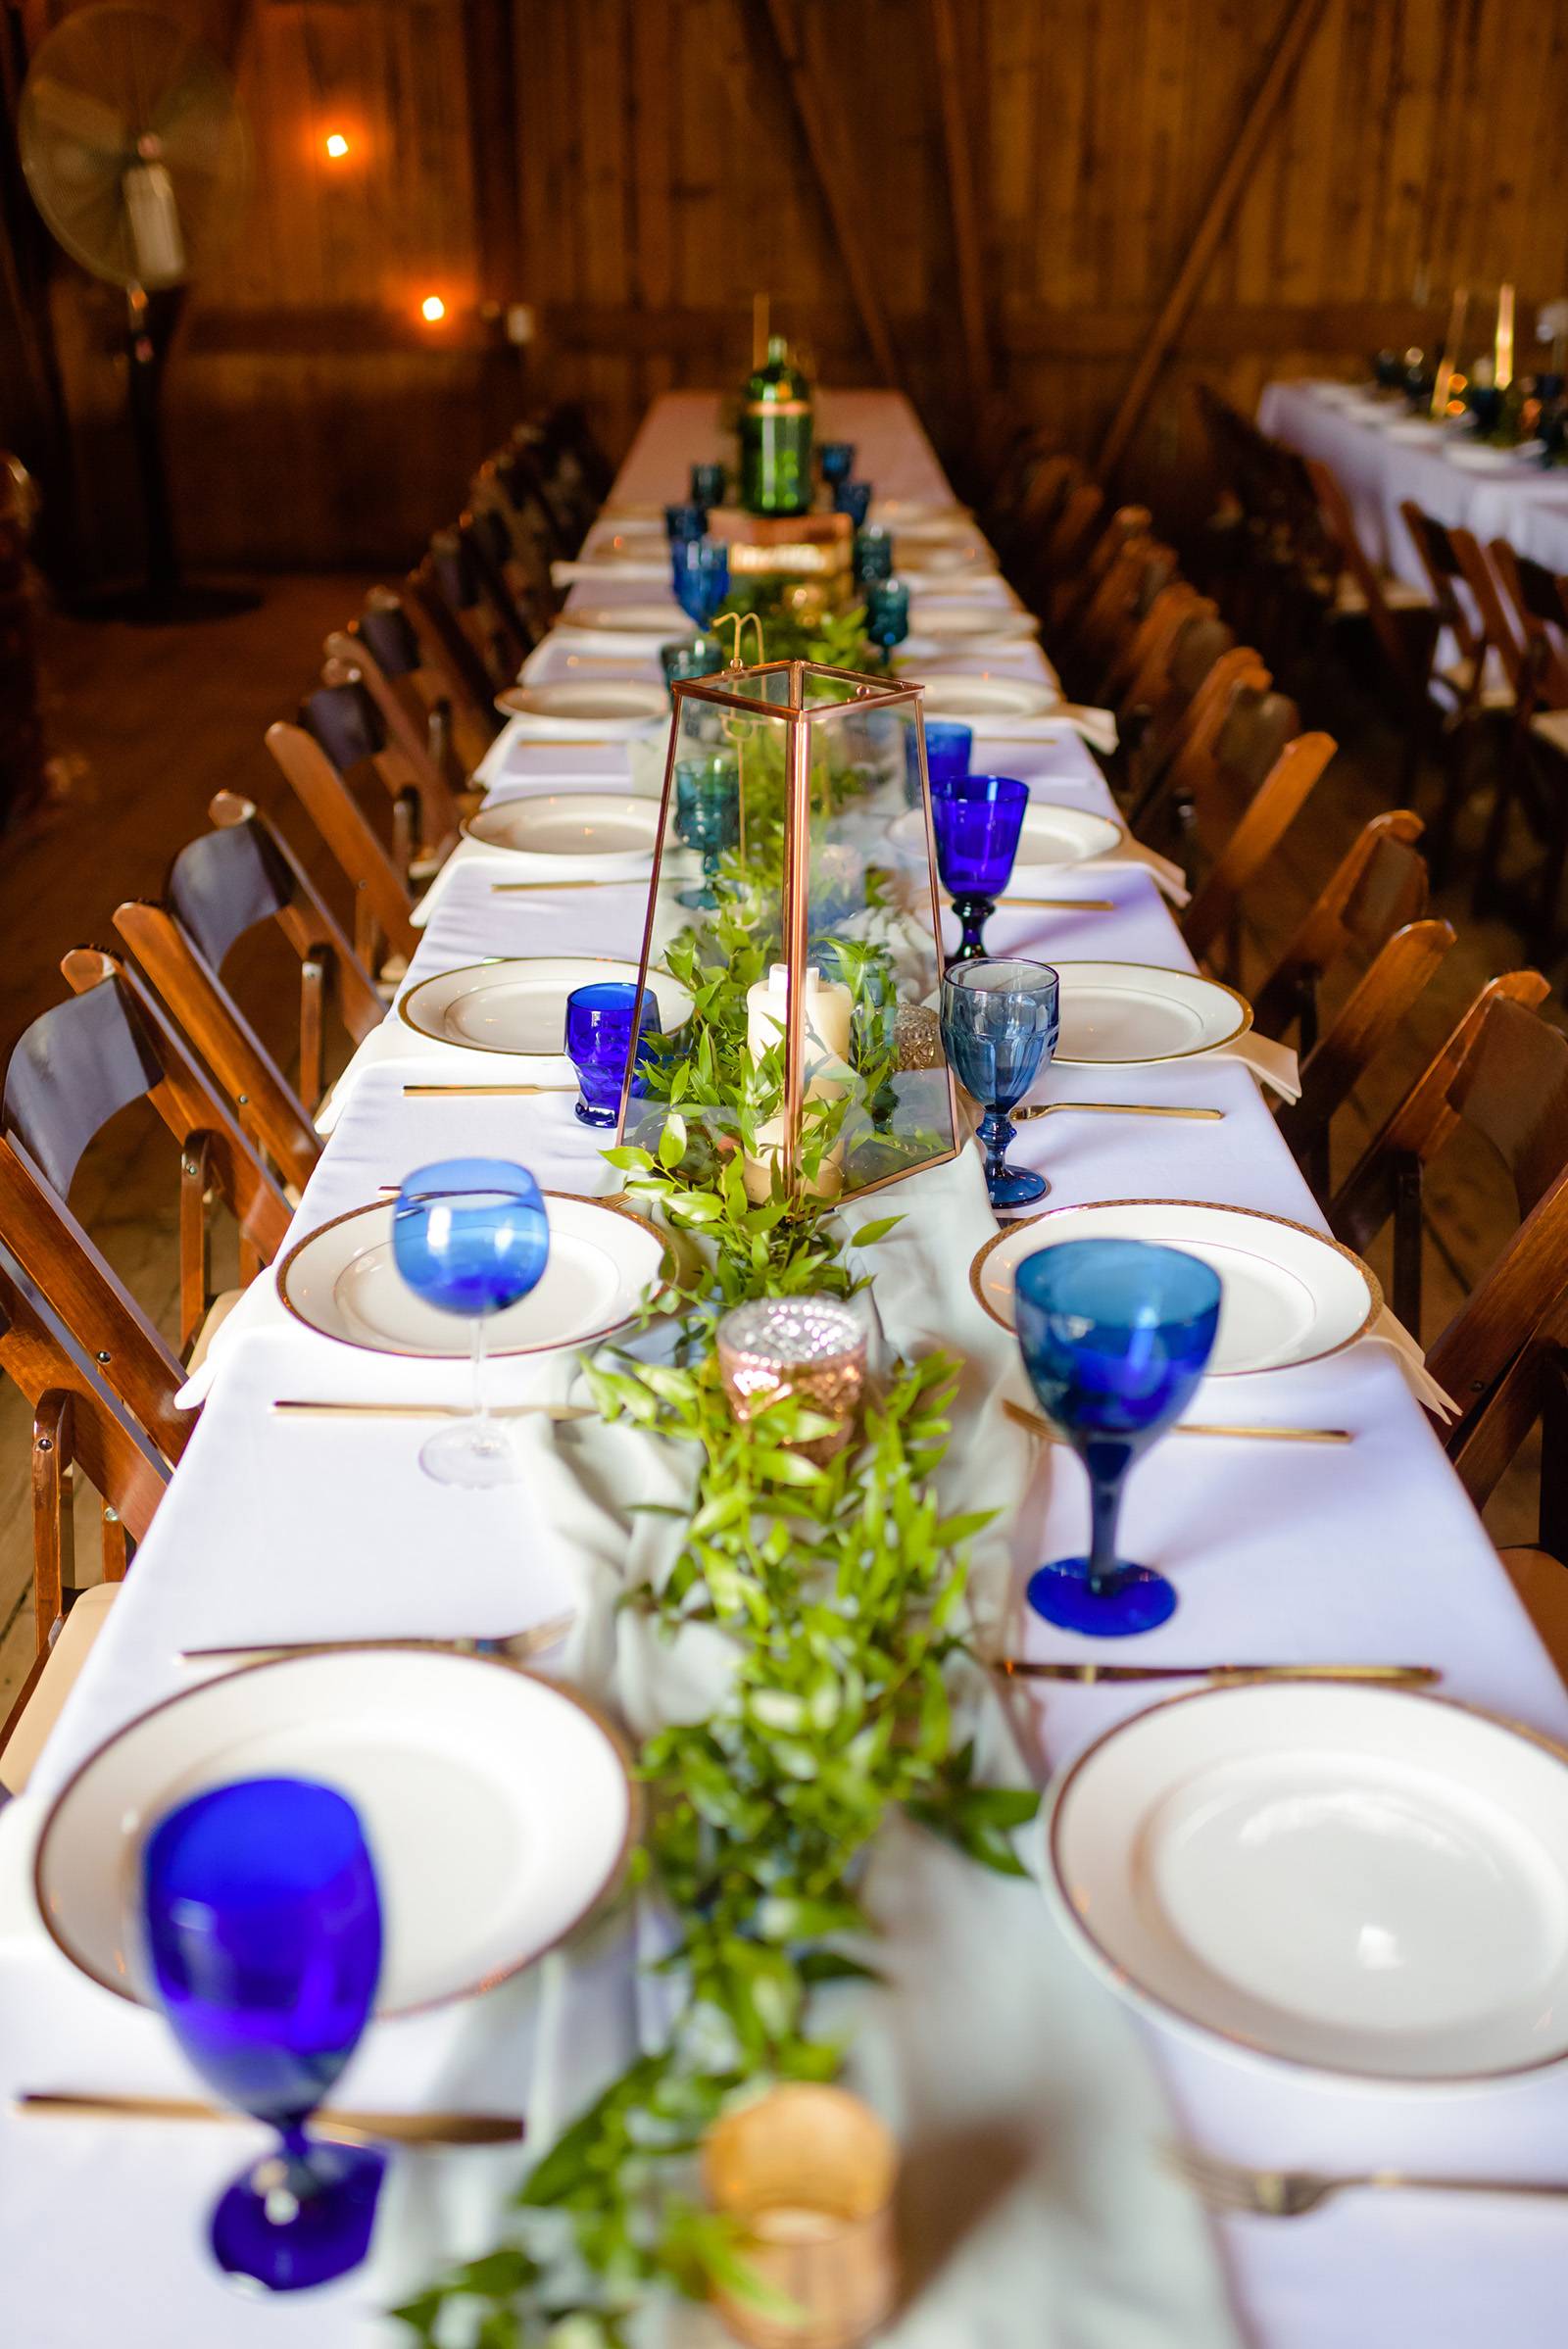 reception table decor, table setting, table settings, blue glassware, greenery, wood chairs